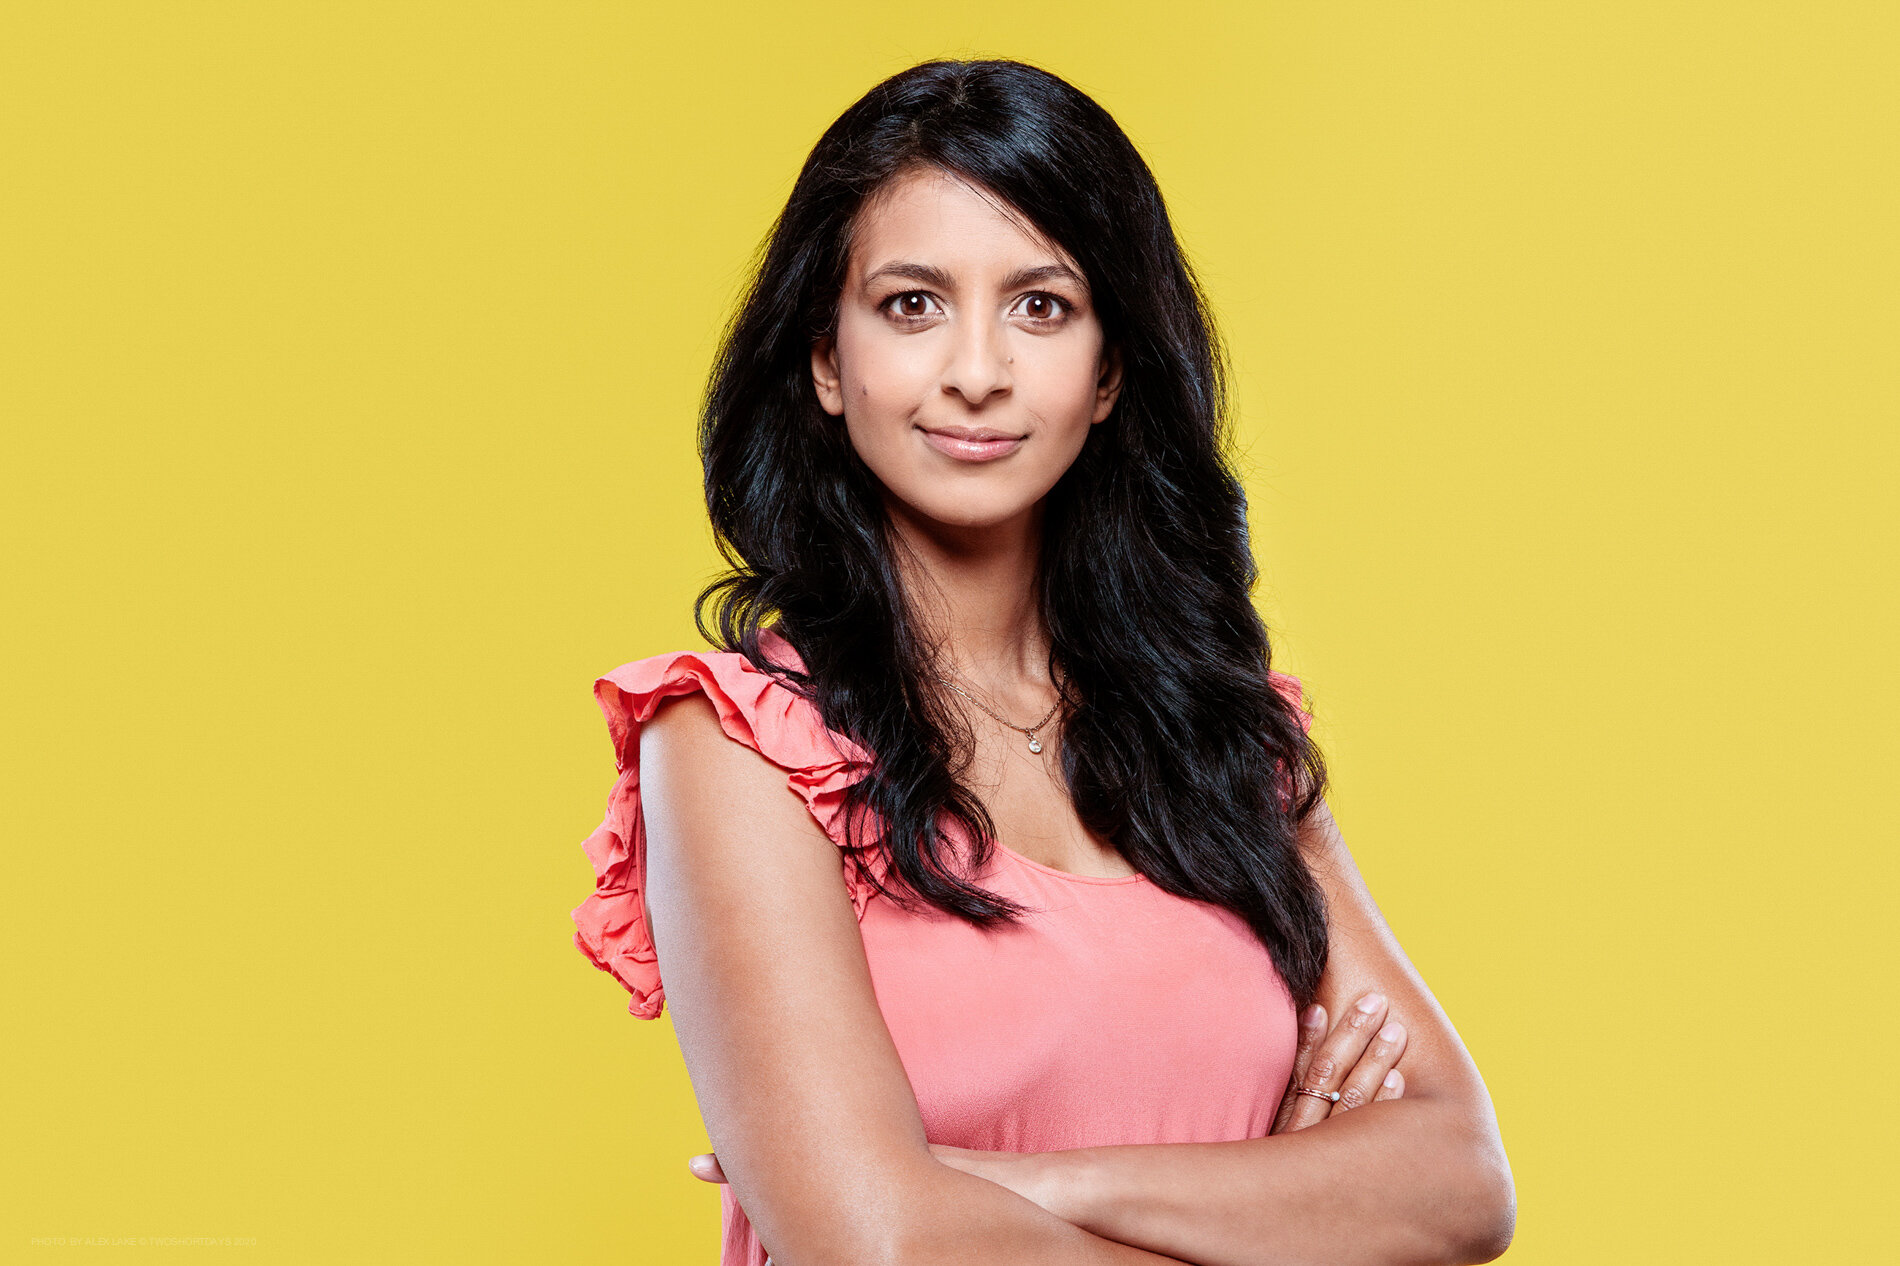 konnie_huq_photography_copyright_ALEX_LAKE_do_not_reproduce_without_permission_TWOSHORTDAYS.jpg